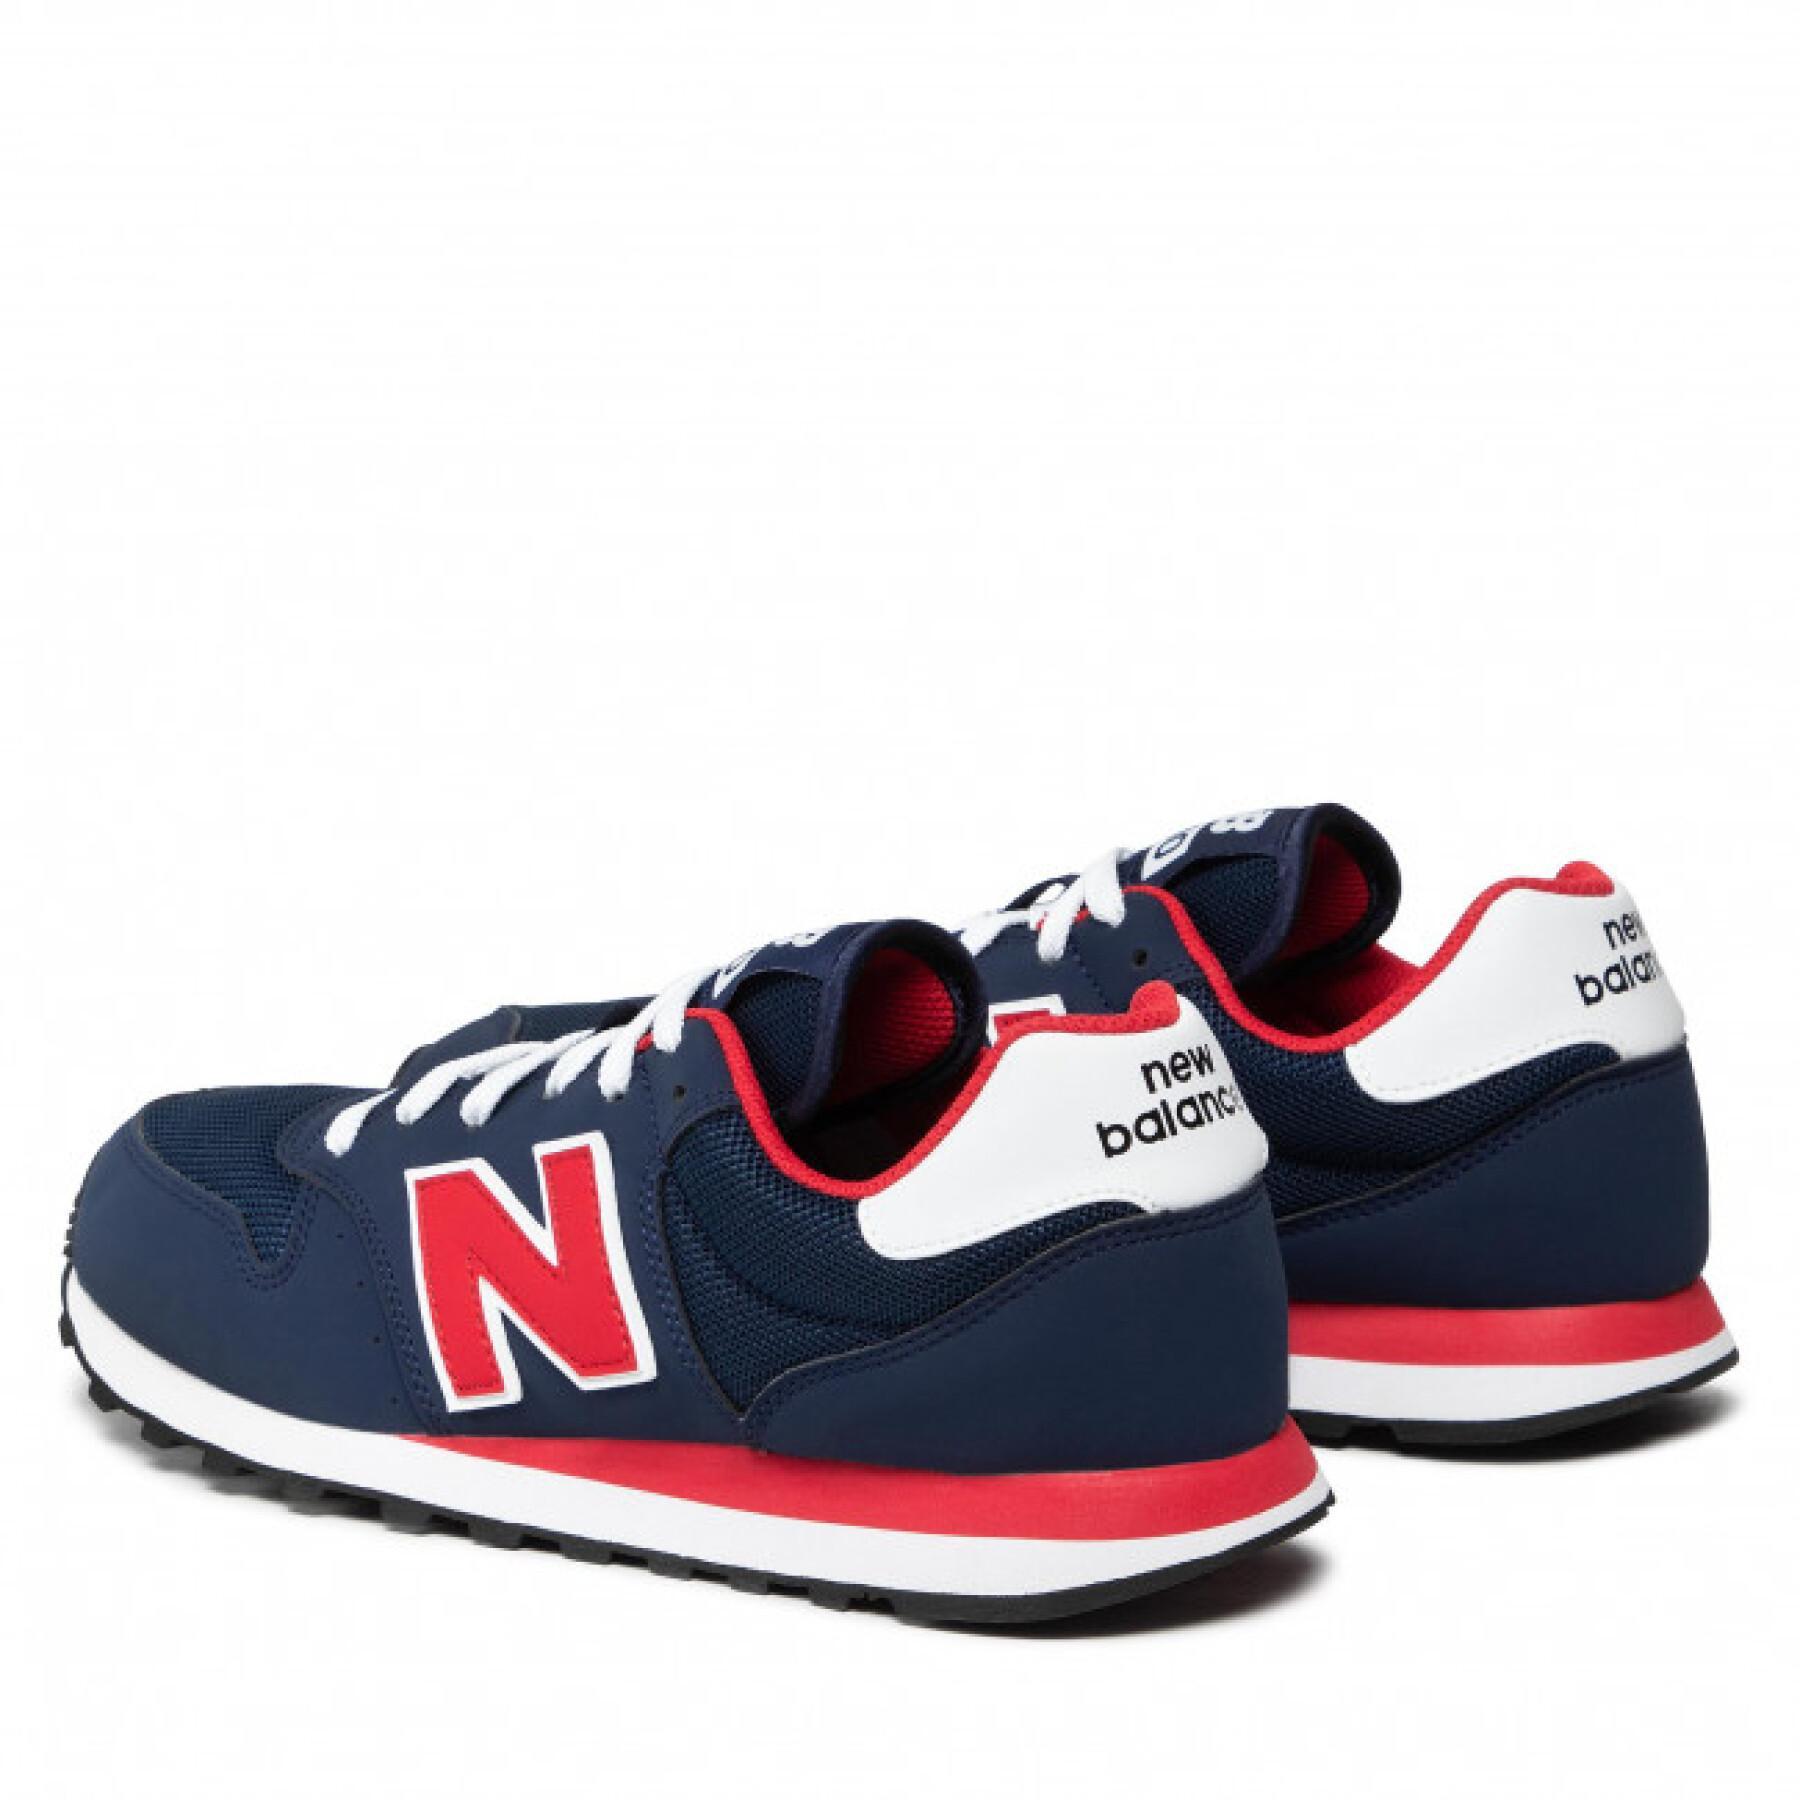 Sneakers New Balance 500 Classic